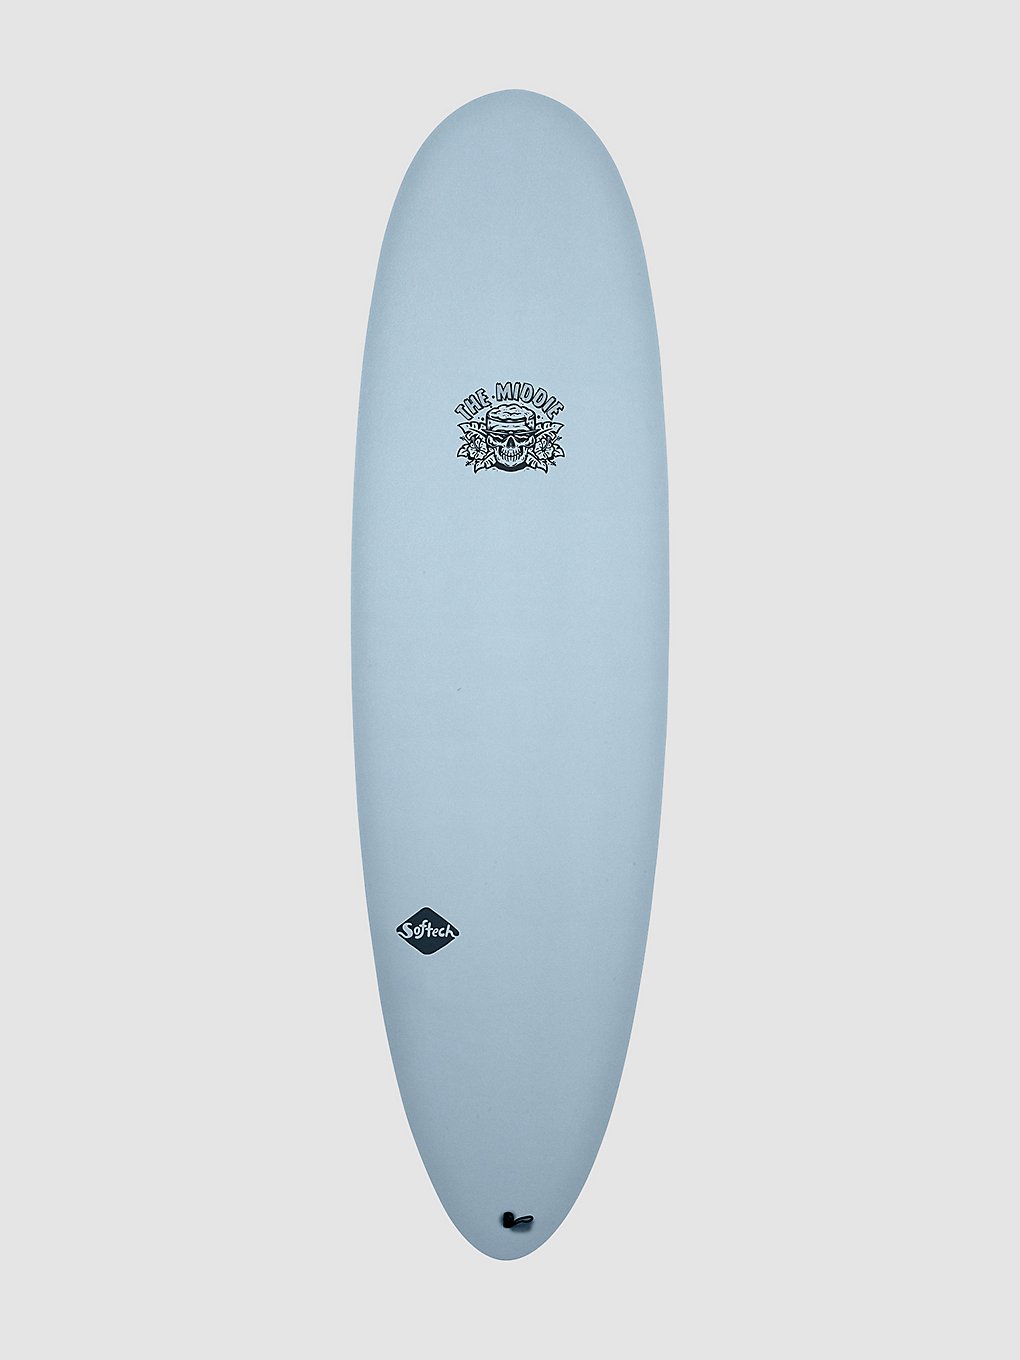 Softech The Middie 6'4 Surfboard patroon